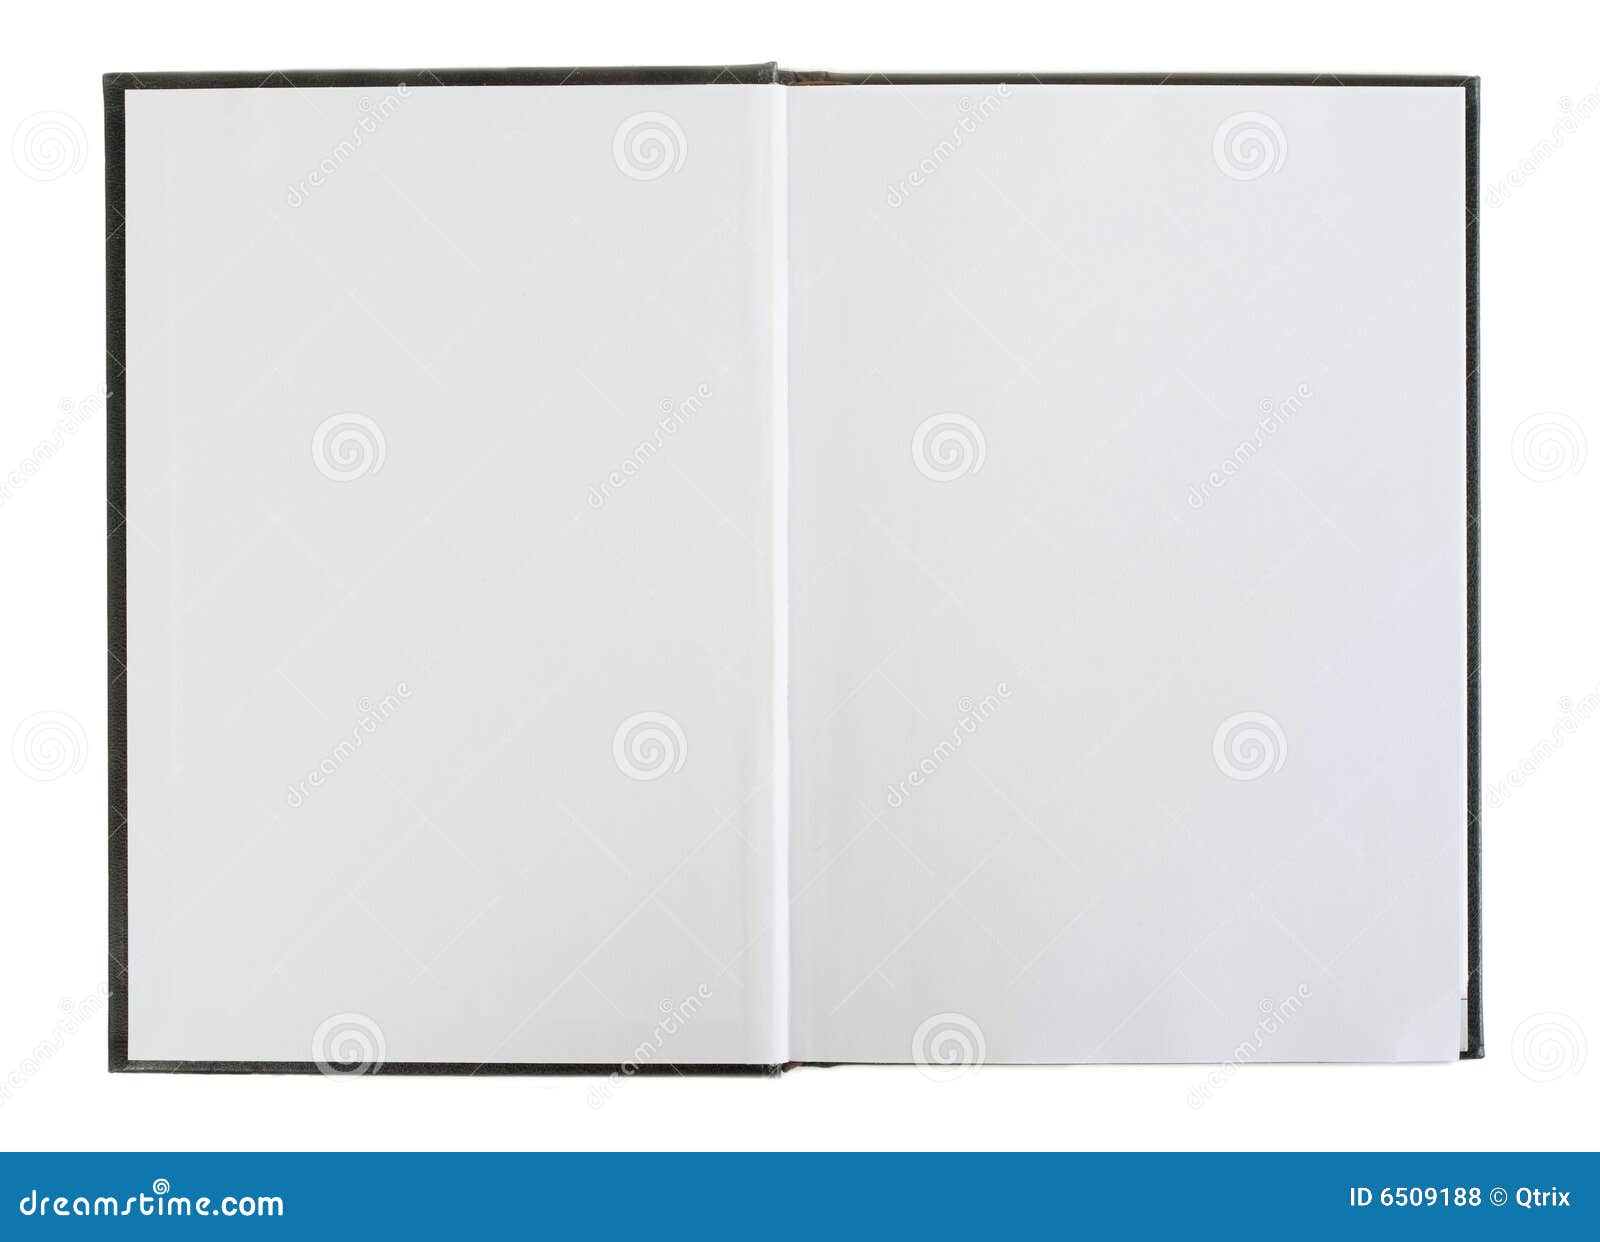 clipart open book blank pages - photo #43